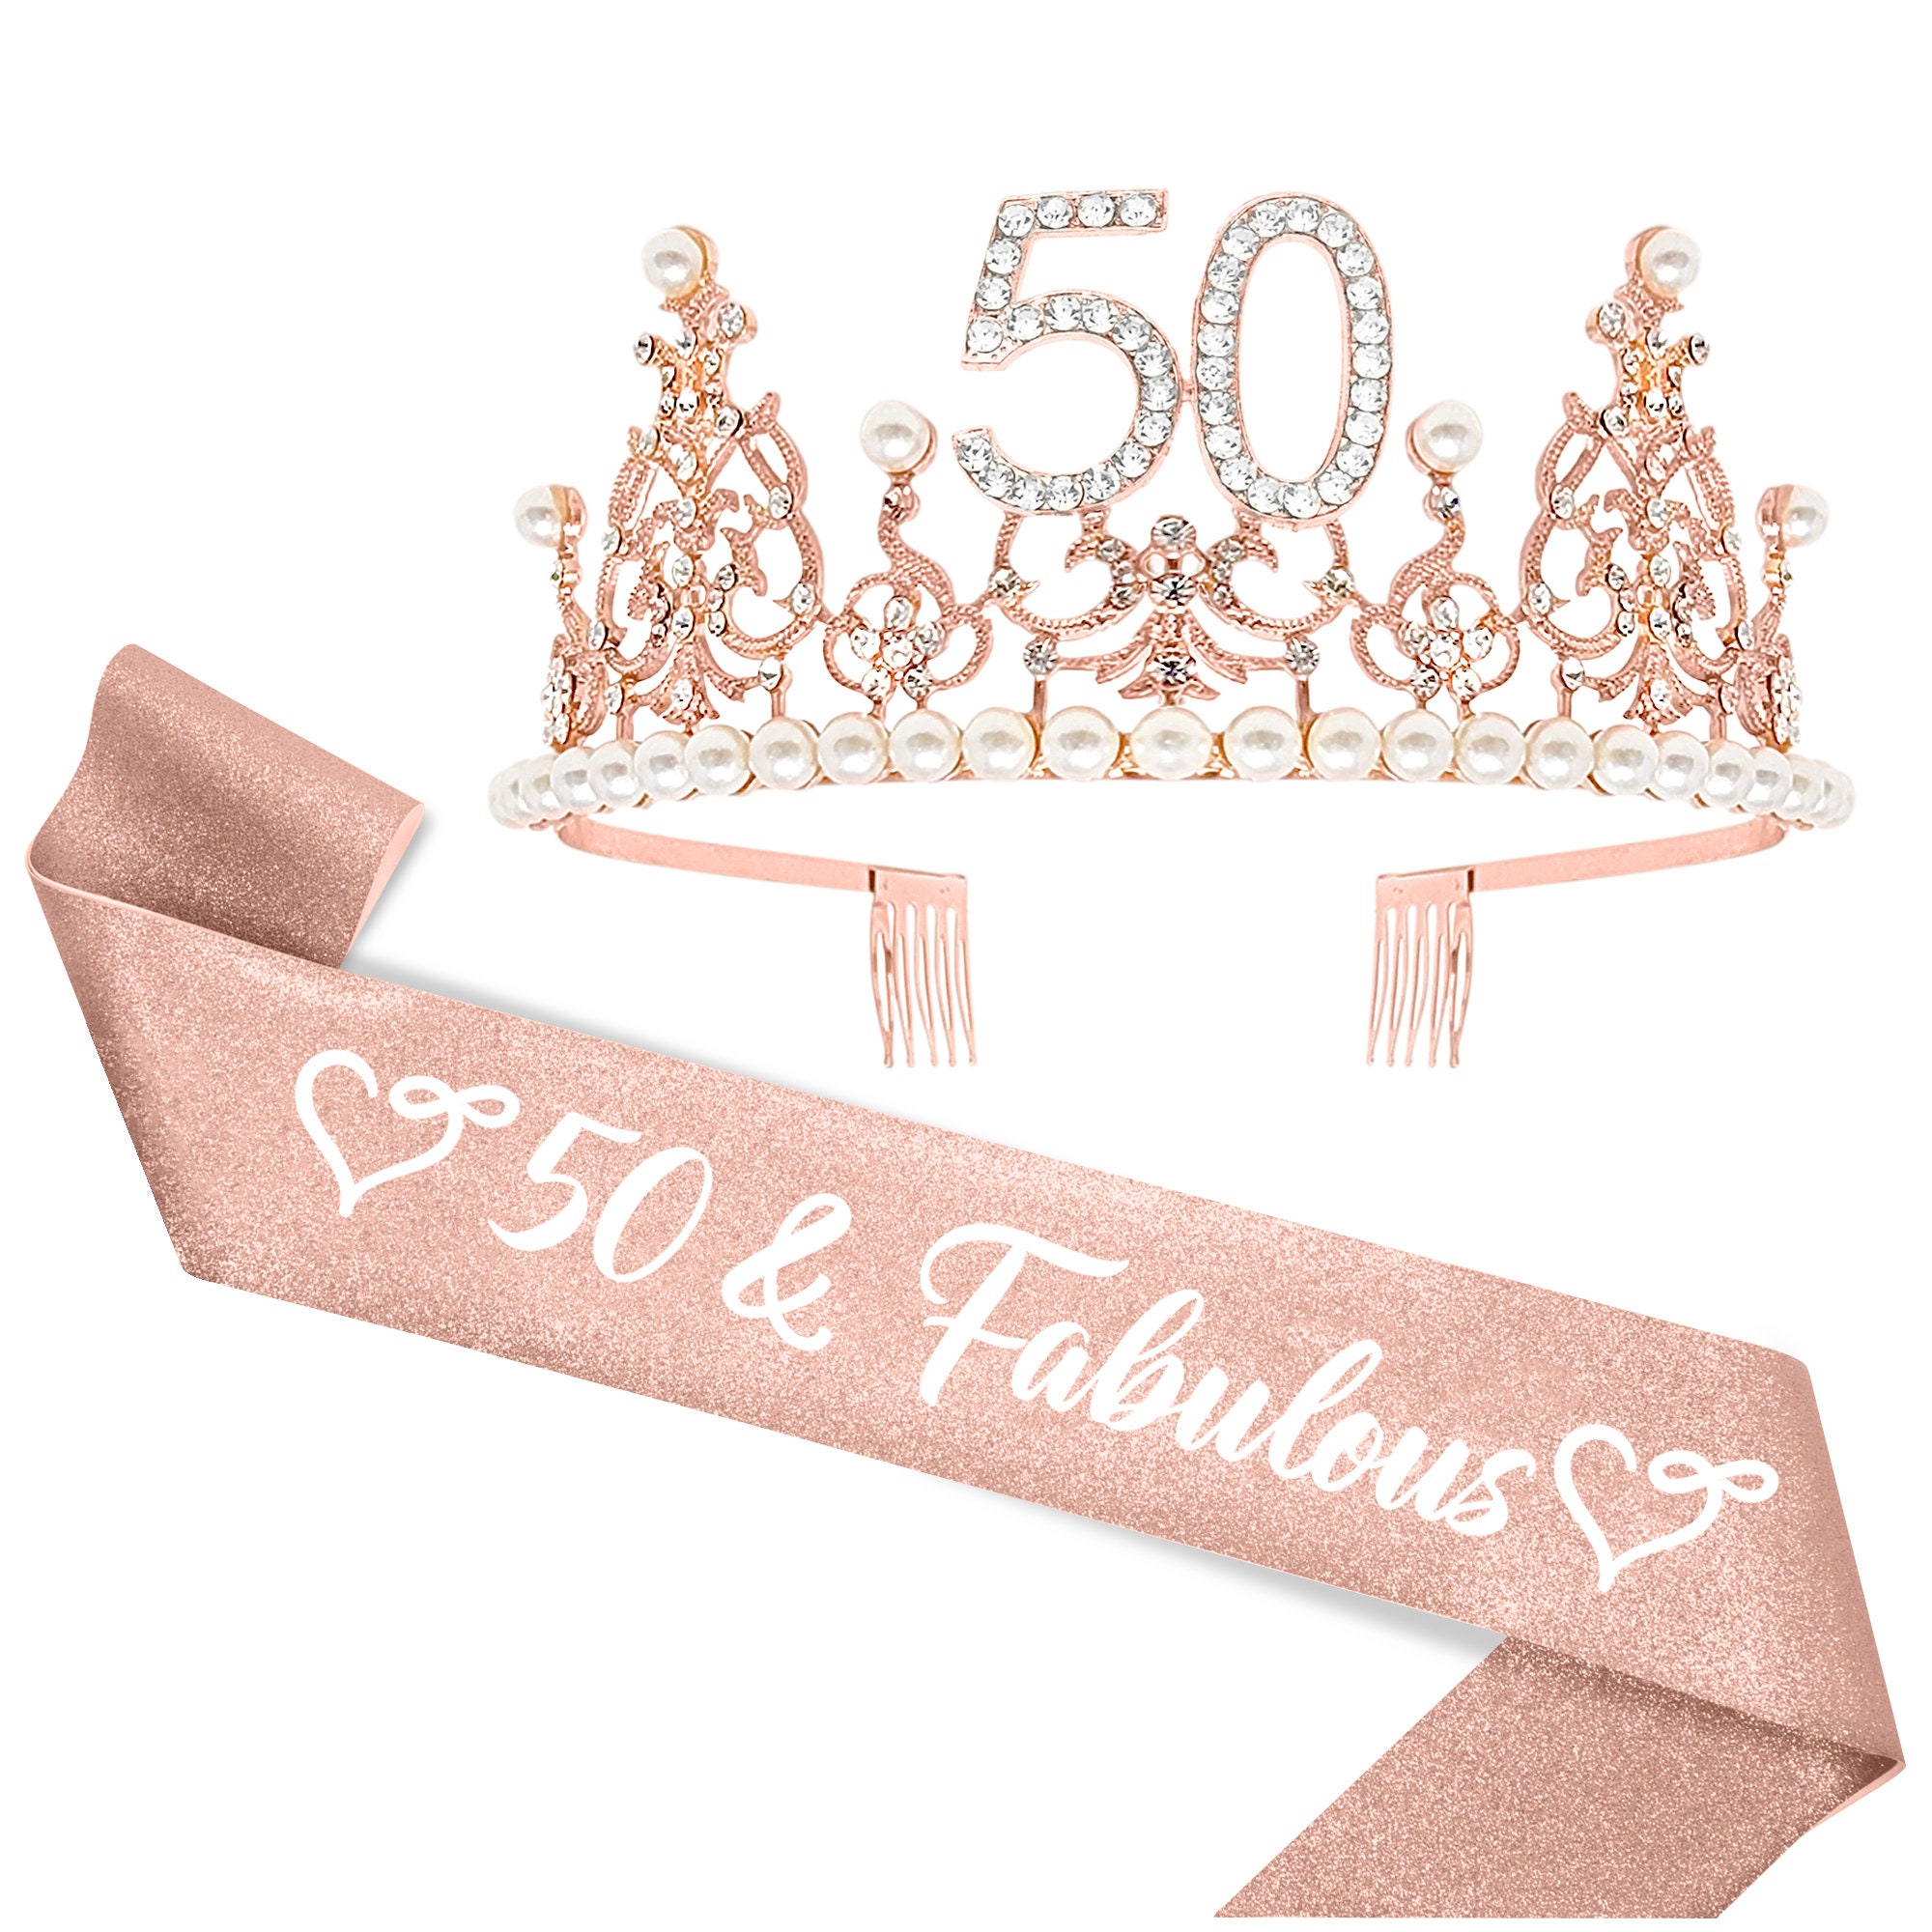 YULVINE Happy 50th Birthday Gifts for Women,Unique 50 Years Old Bday  Present Ideas for Her,Funny 50th Birthday Party Decorations Sash Bracelet  for